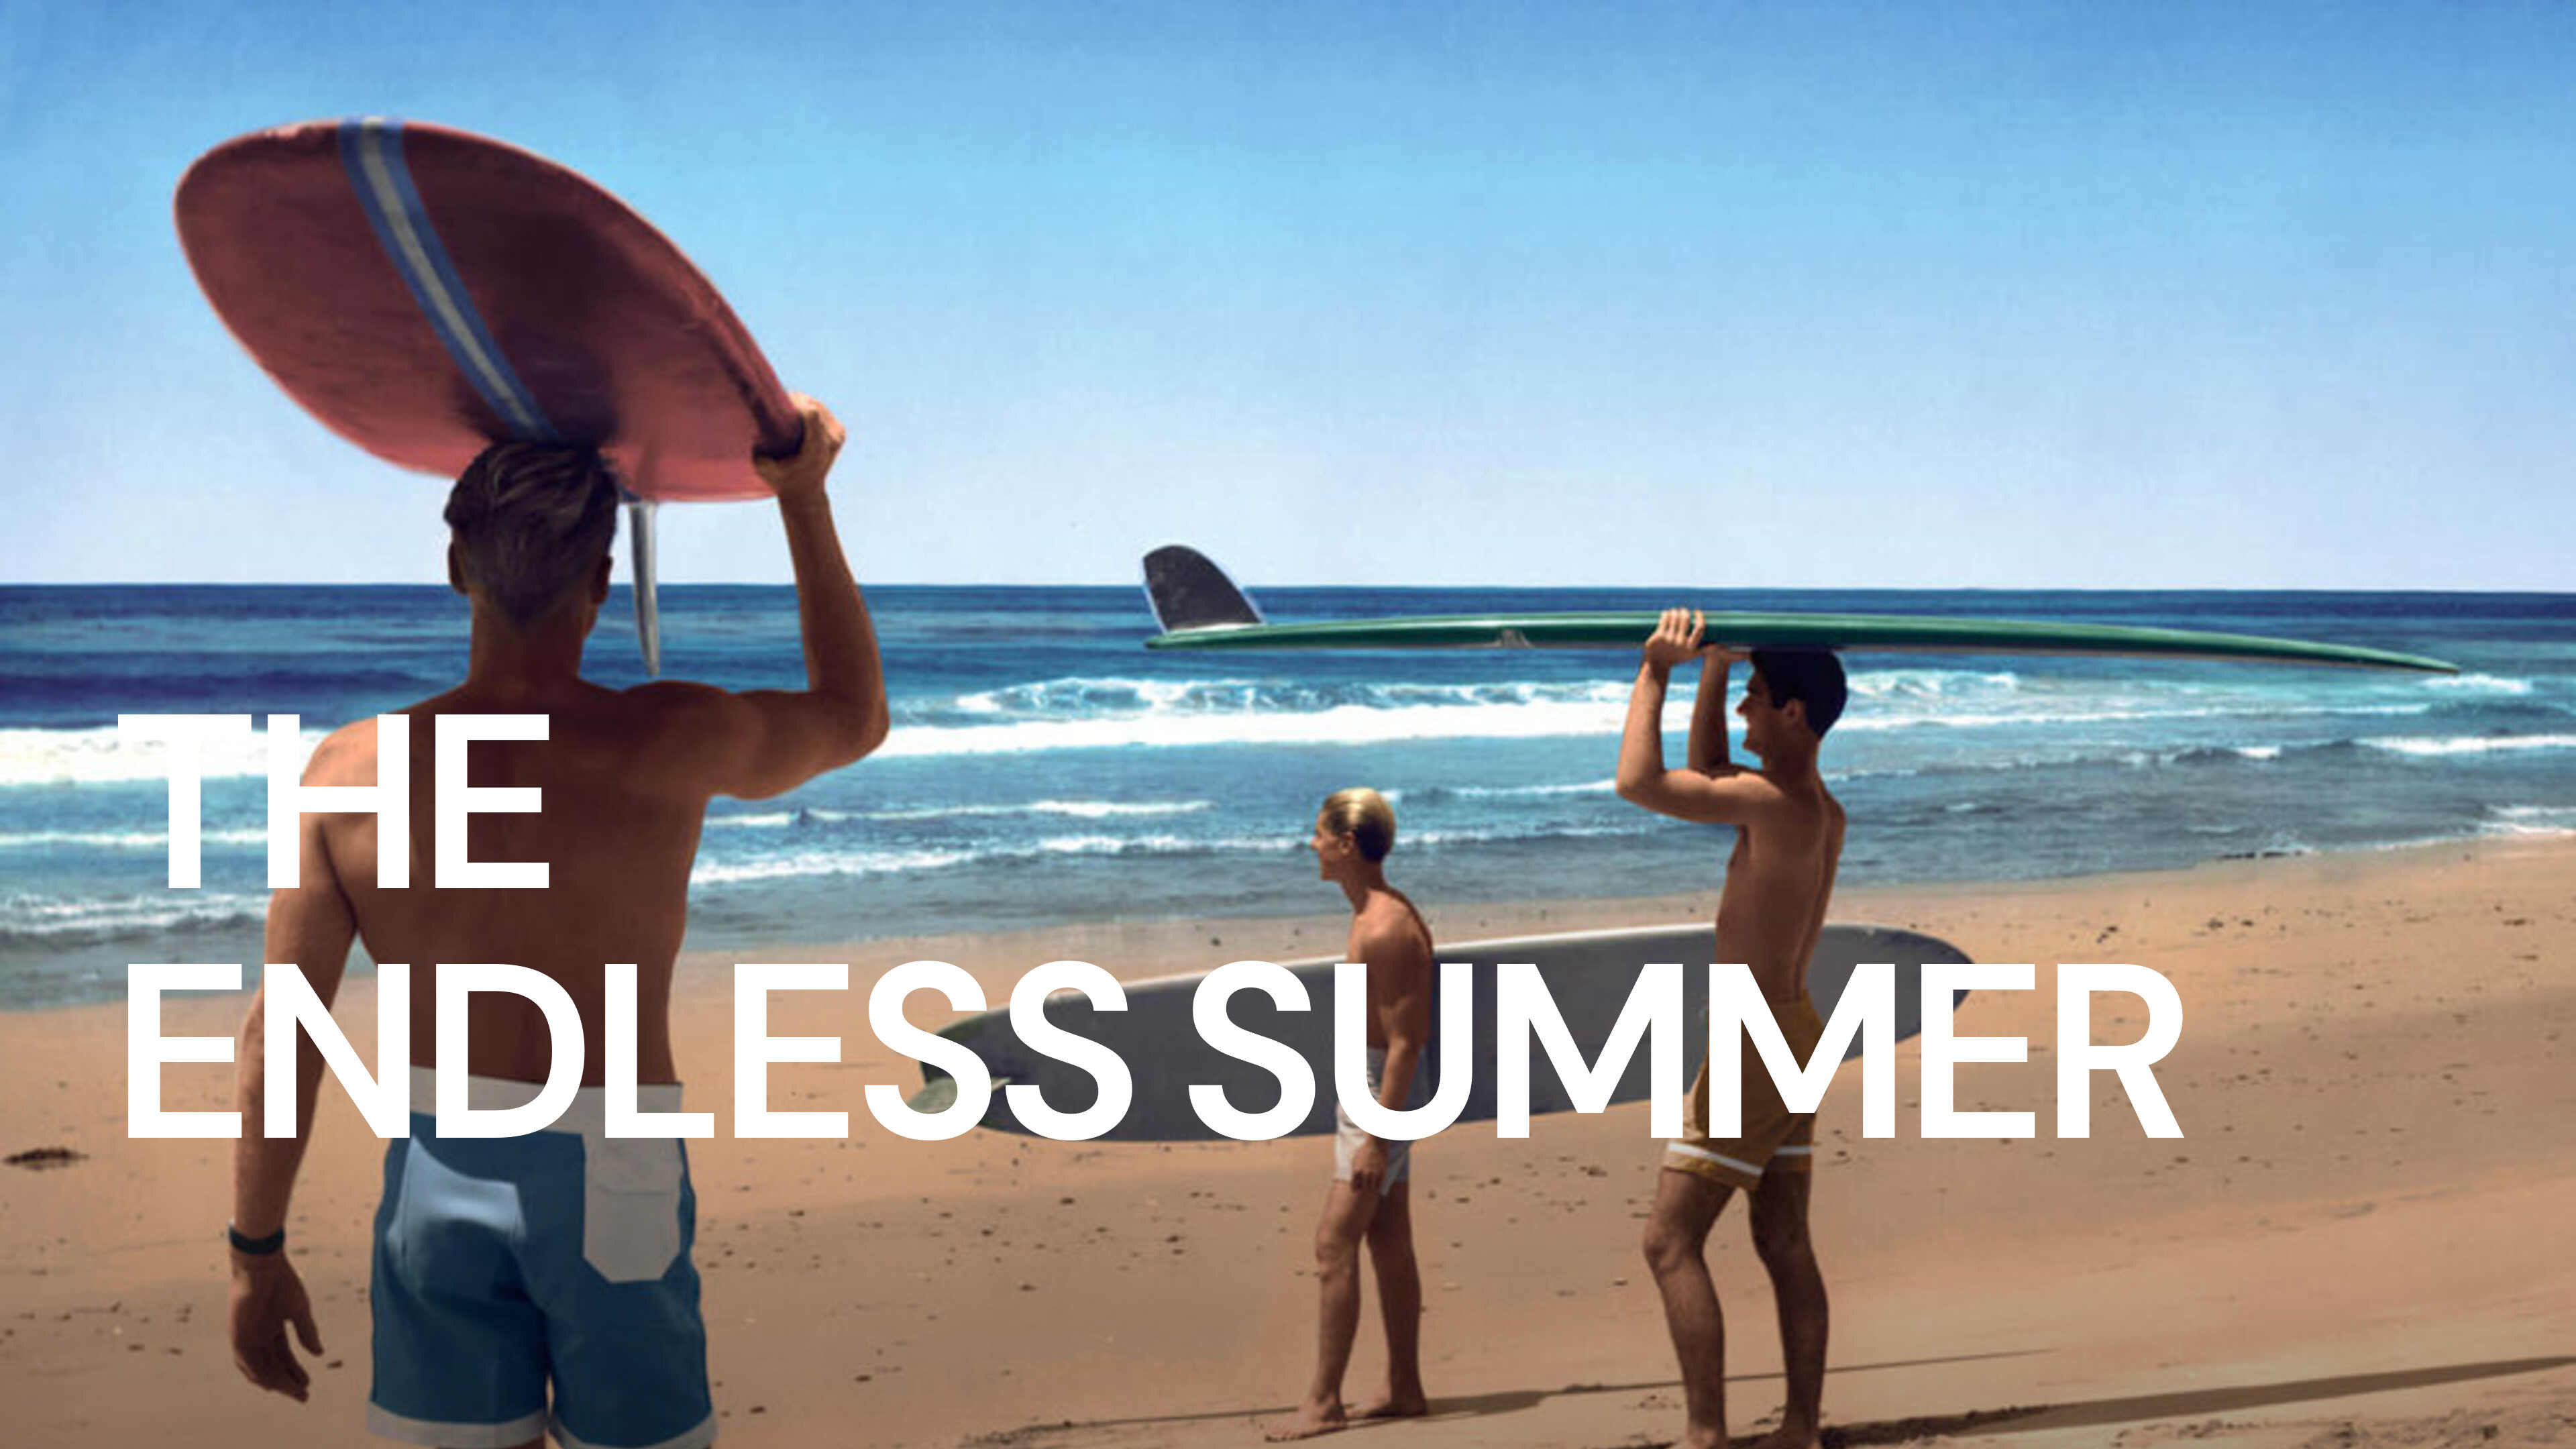 38-facts-about-the-movie-the-endless-summer